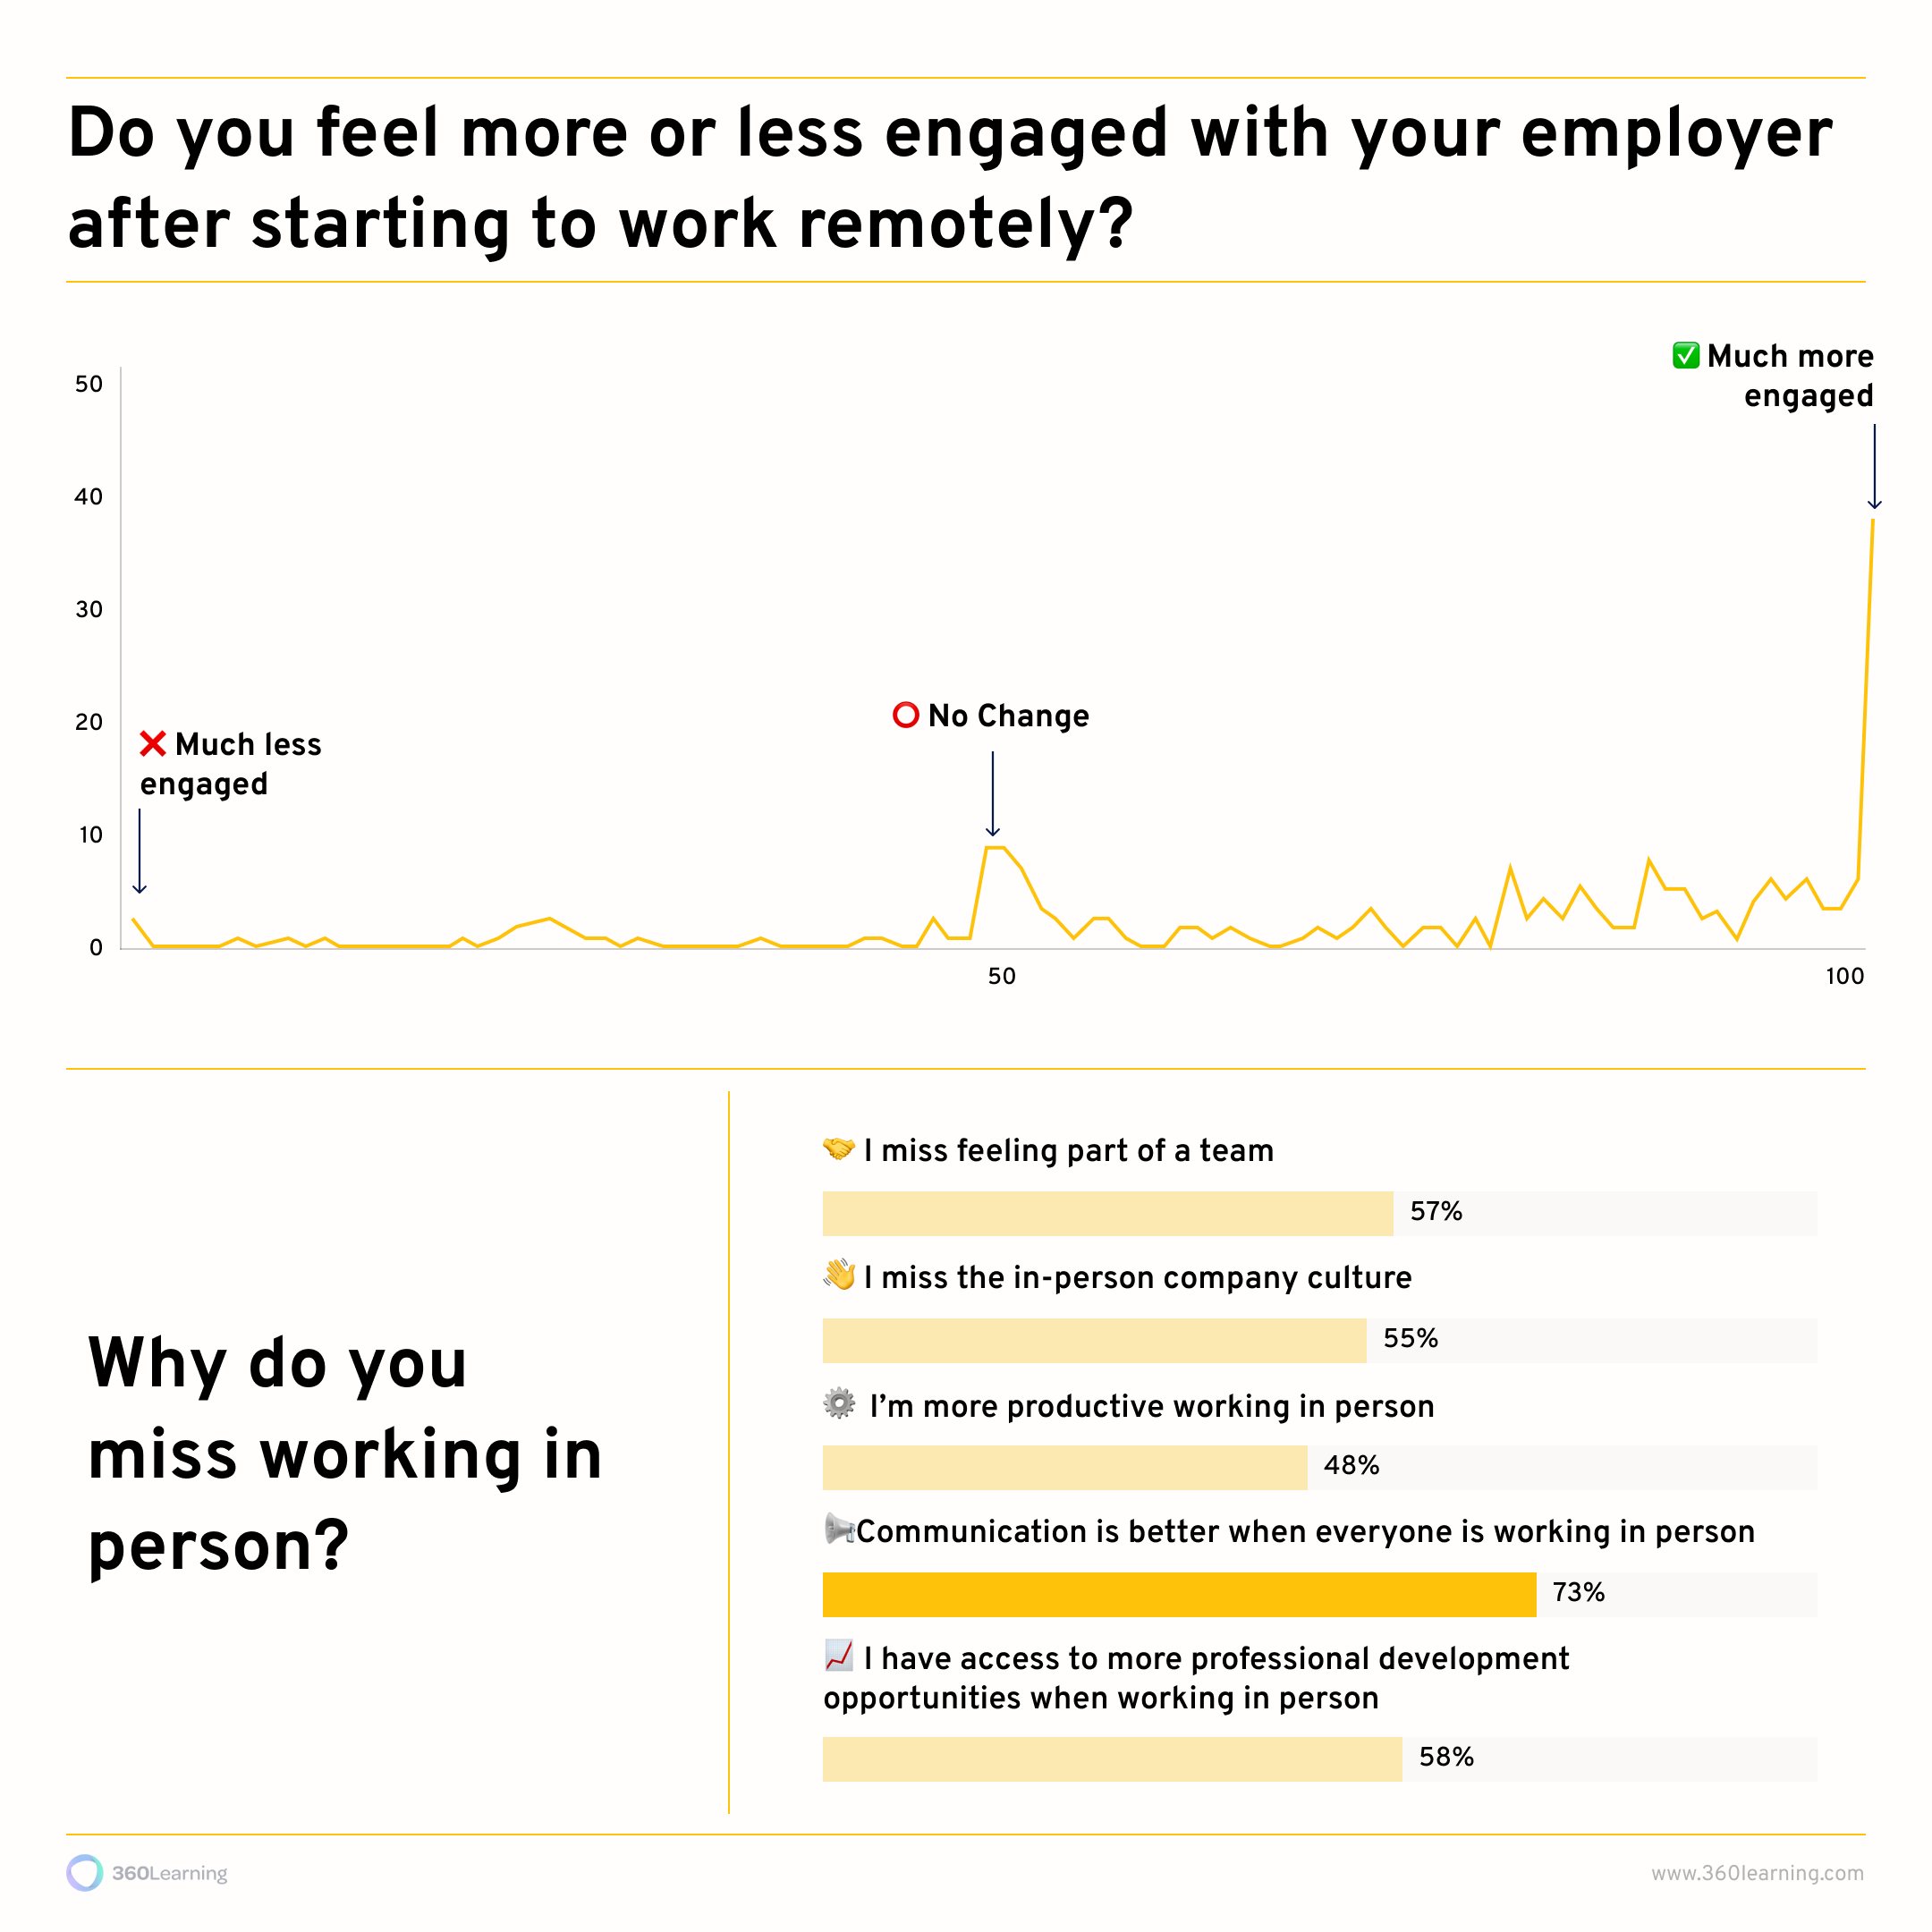 people feel more engaged working remotely 